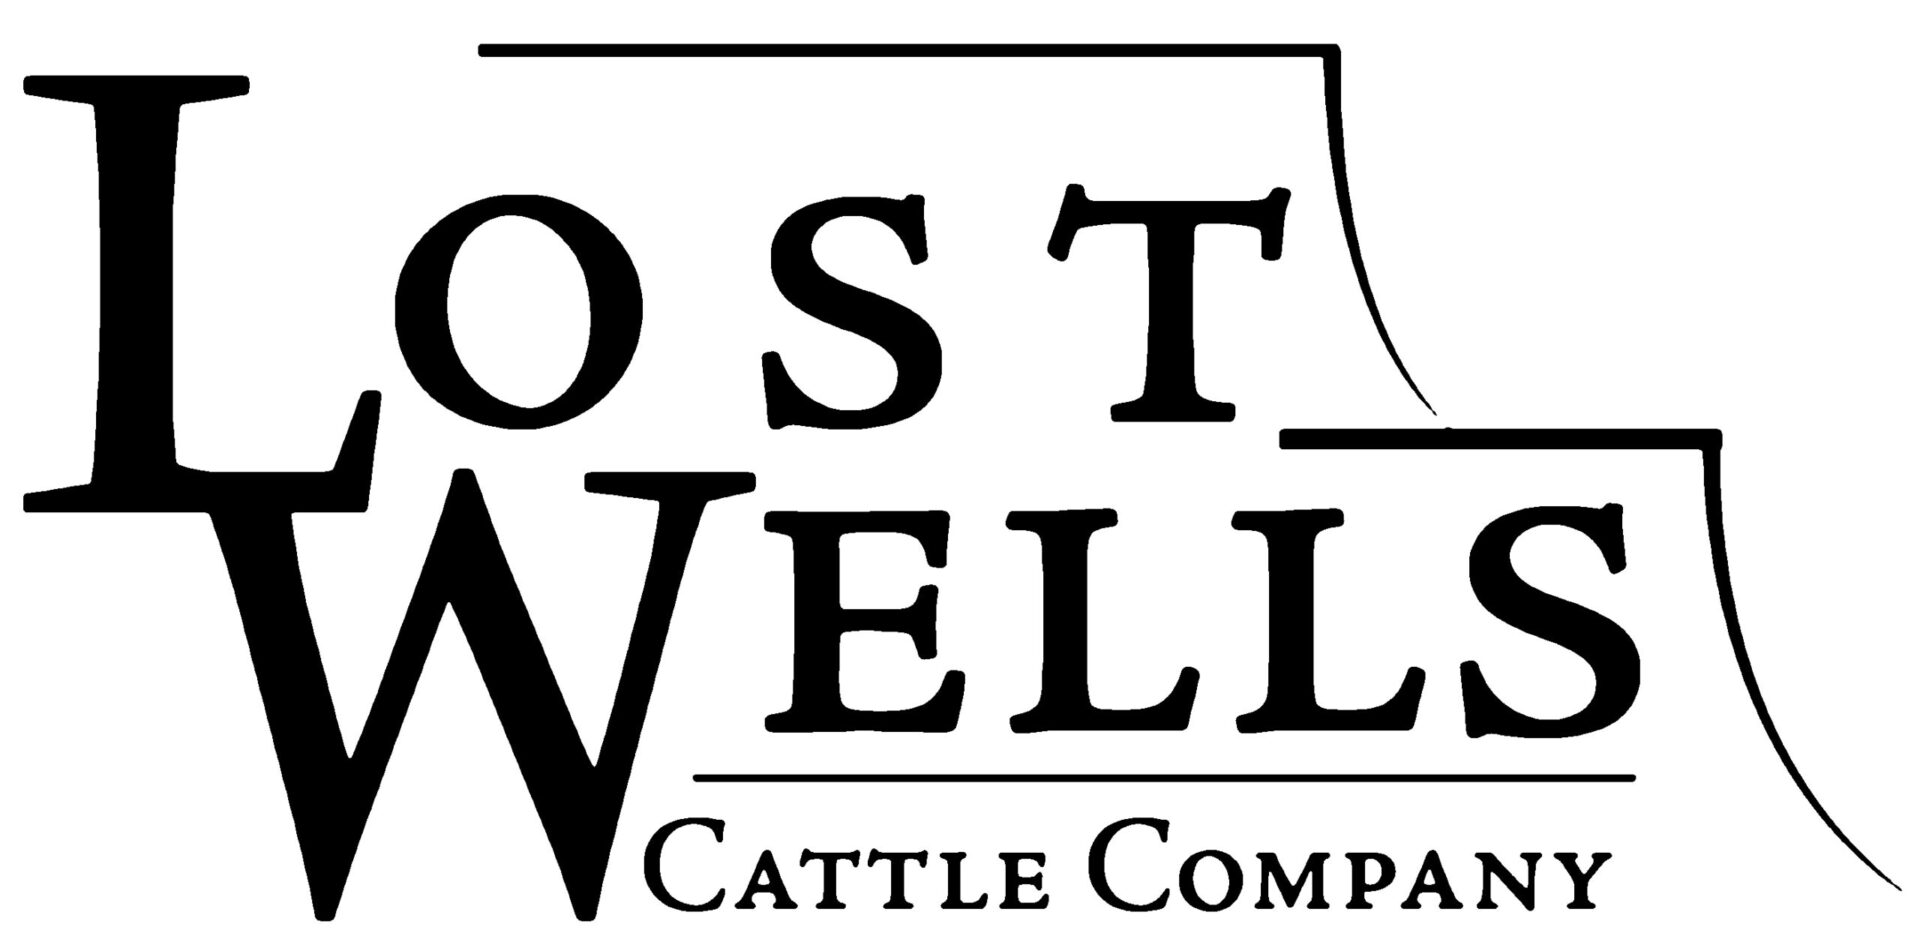 Lost Wells Cattle Company